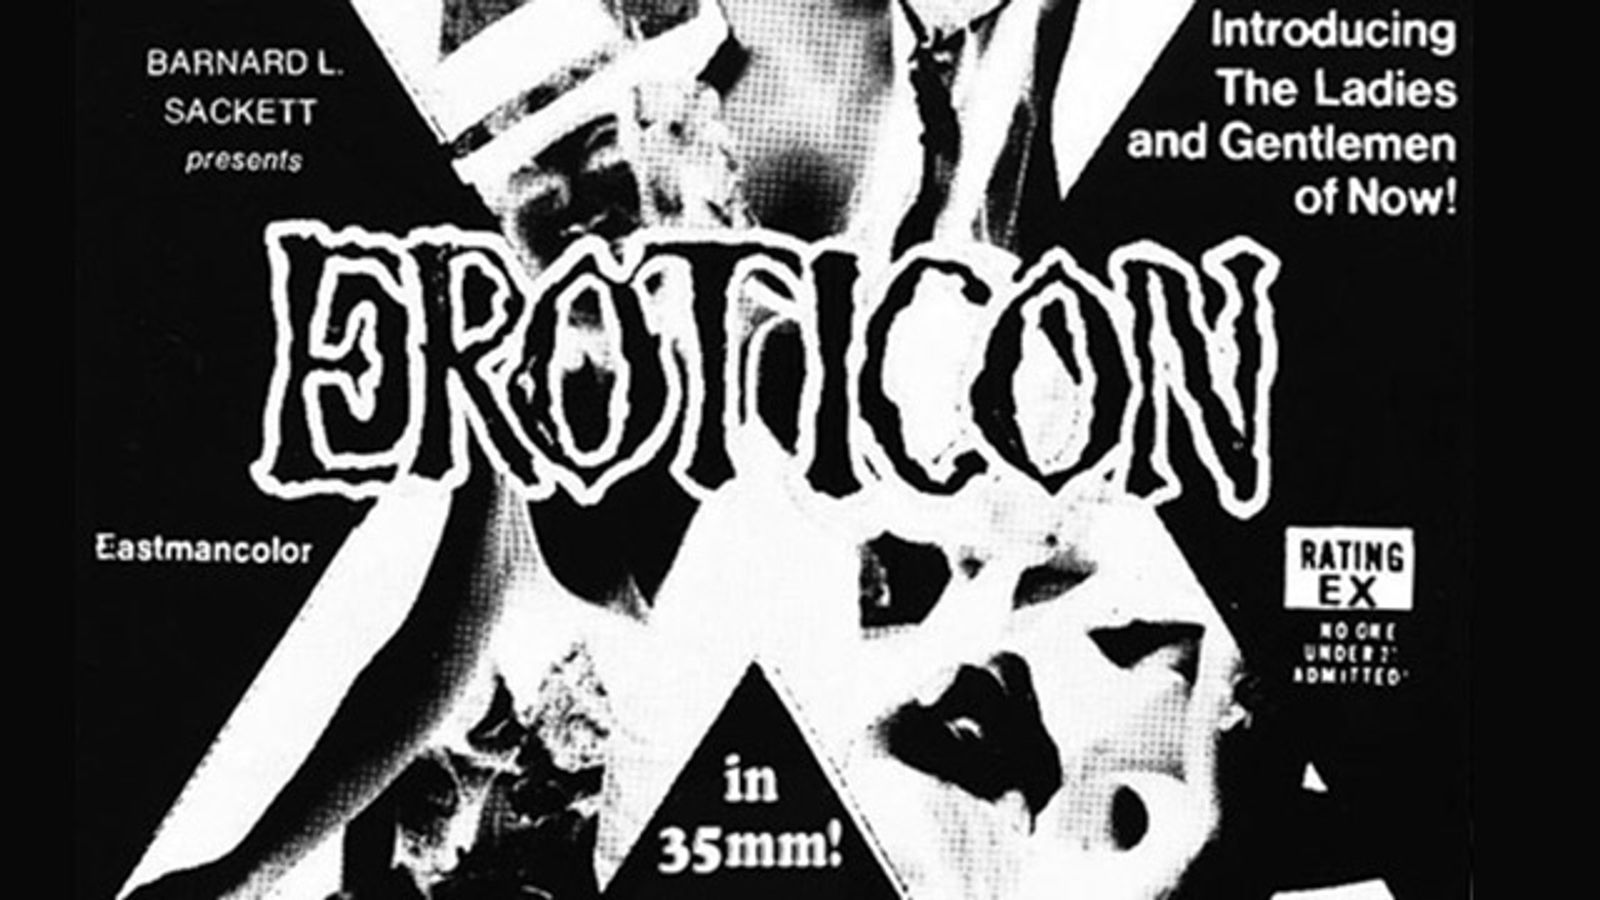 Looking for Some Adult Industry History? Try 'Eroticon' Feb. 18